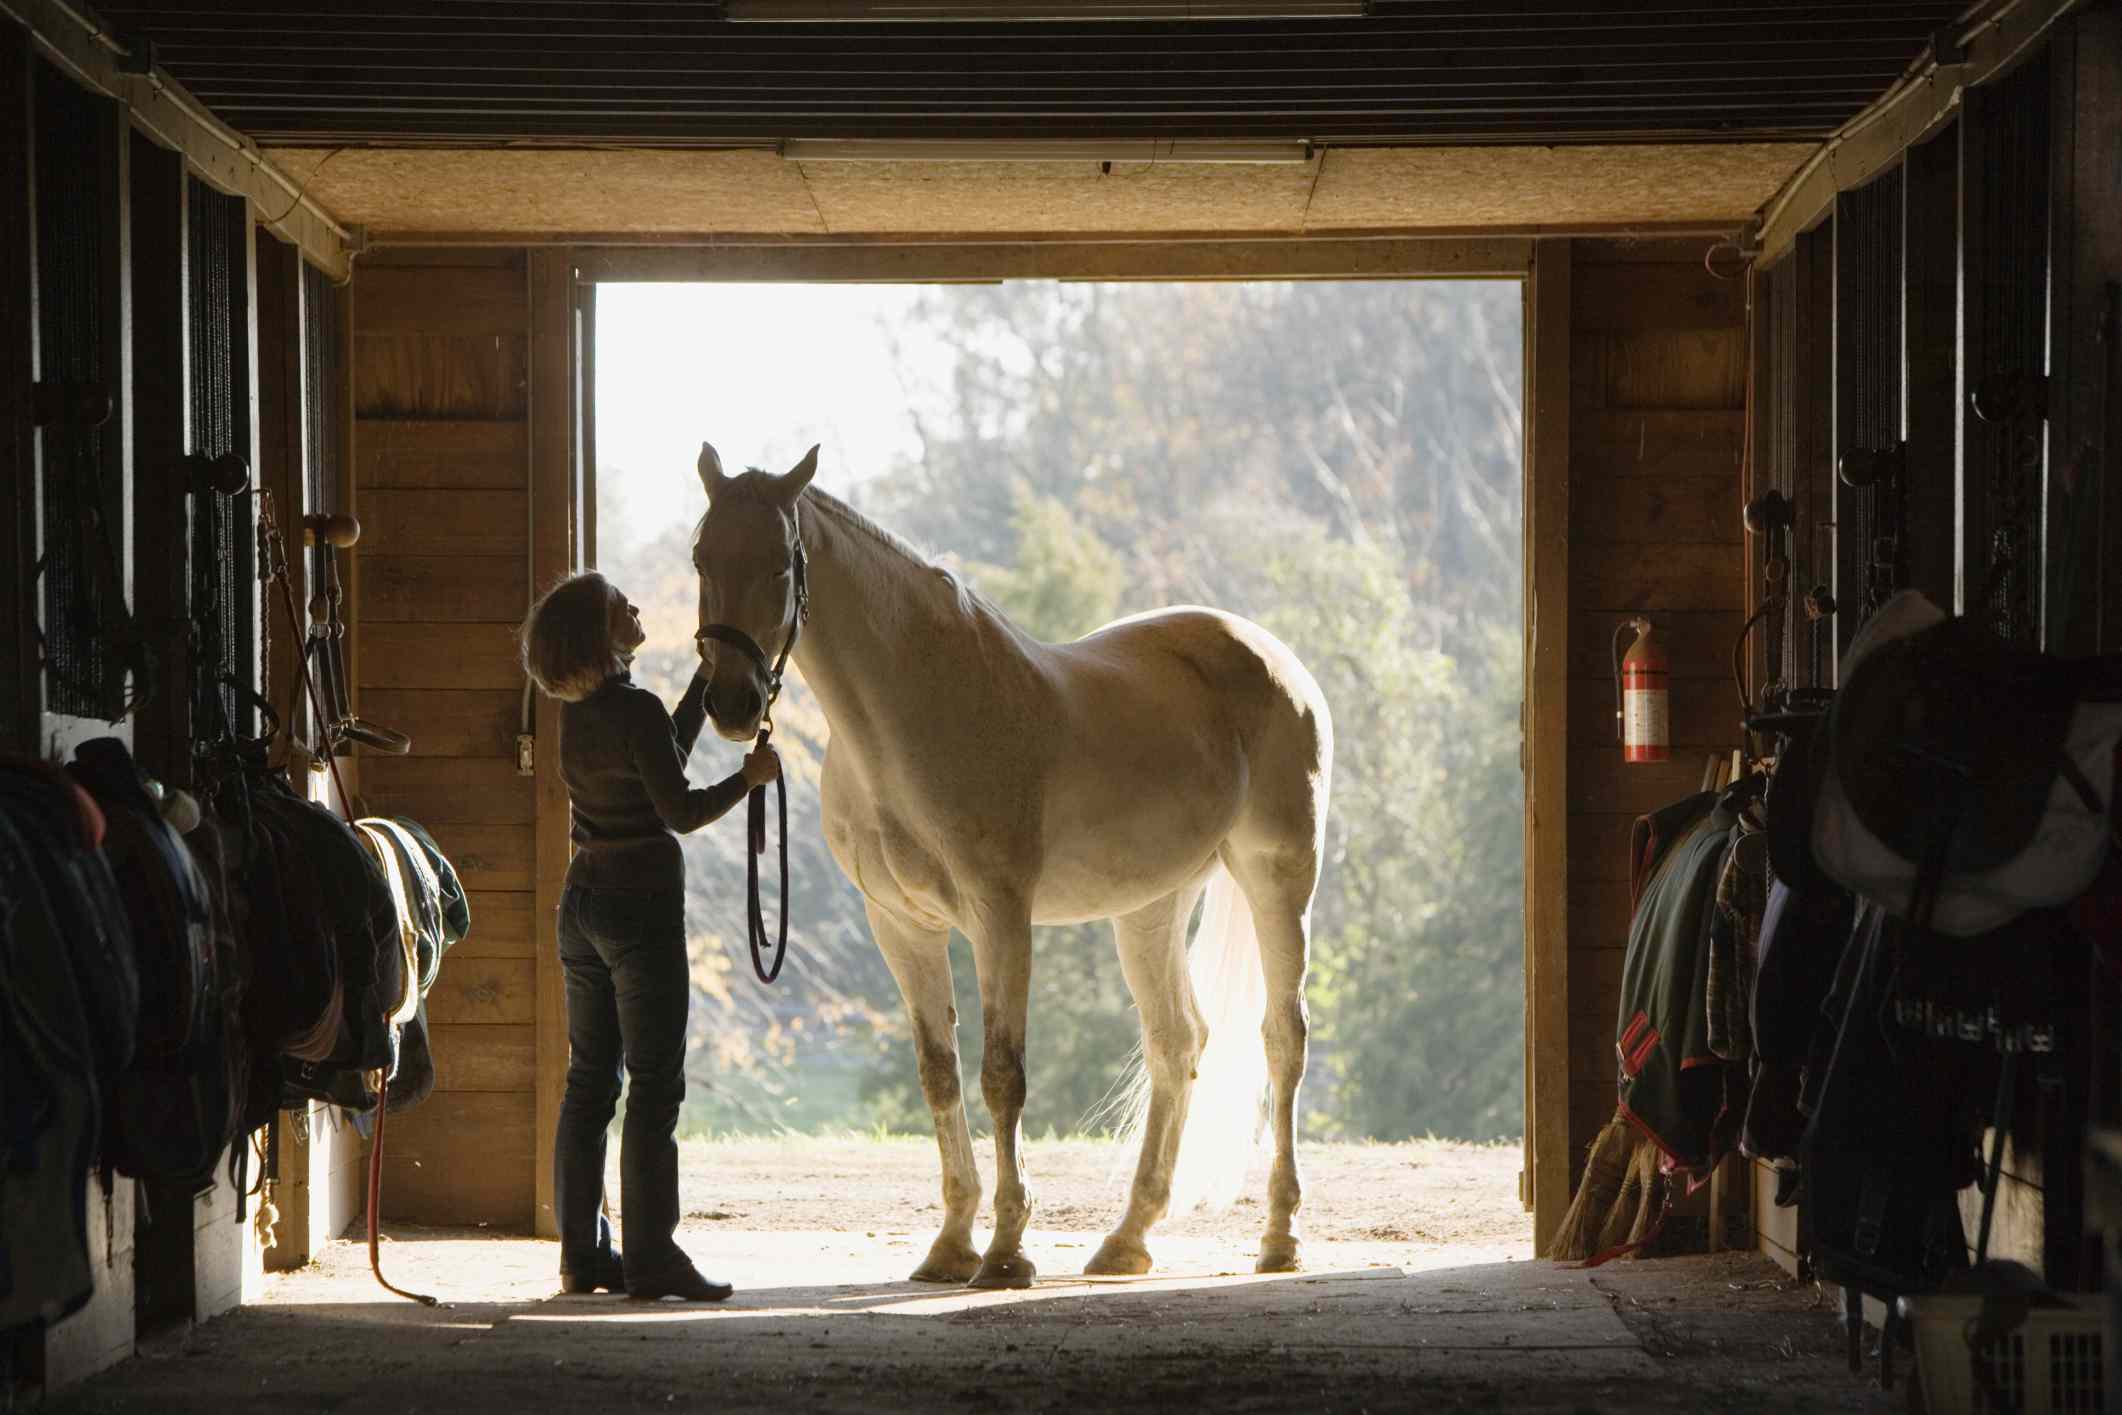 Stable hand grooms a white horse